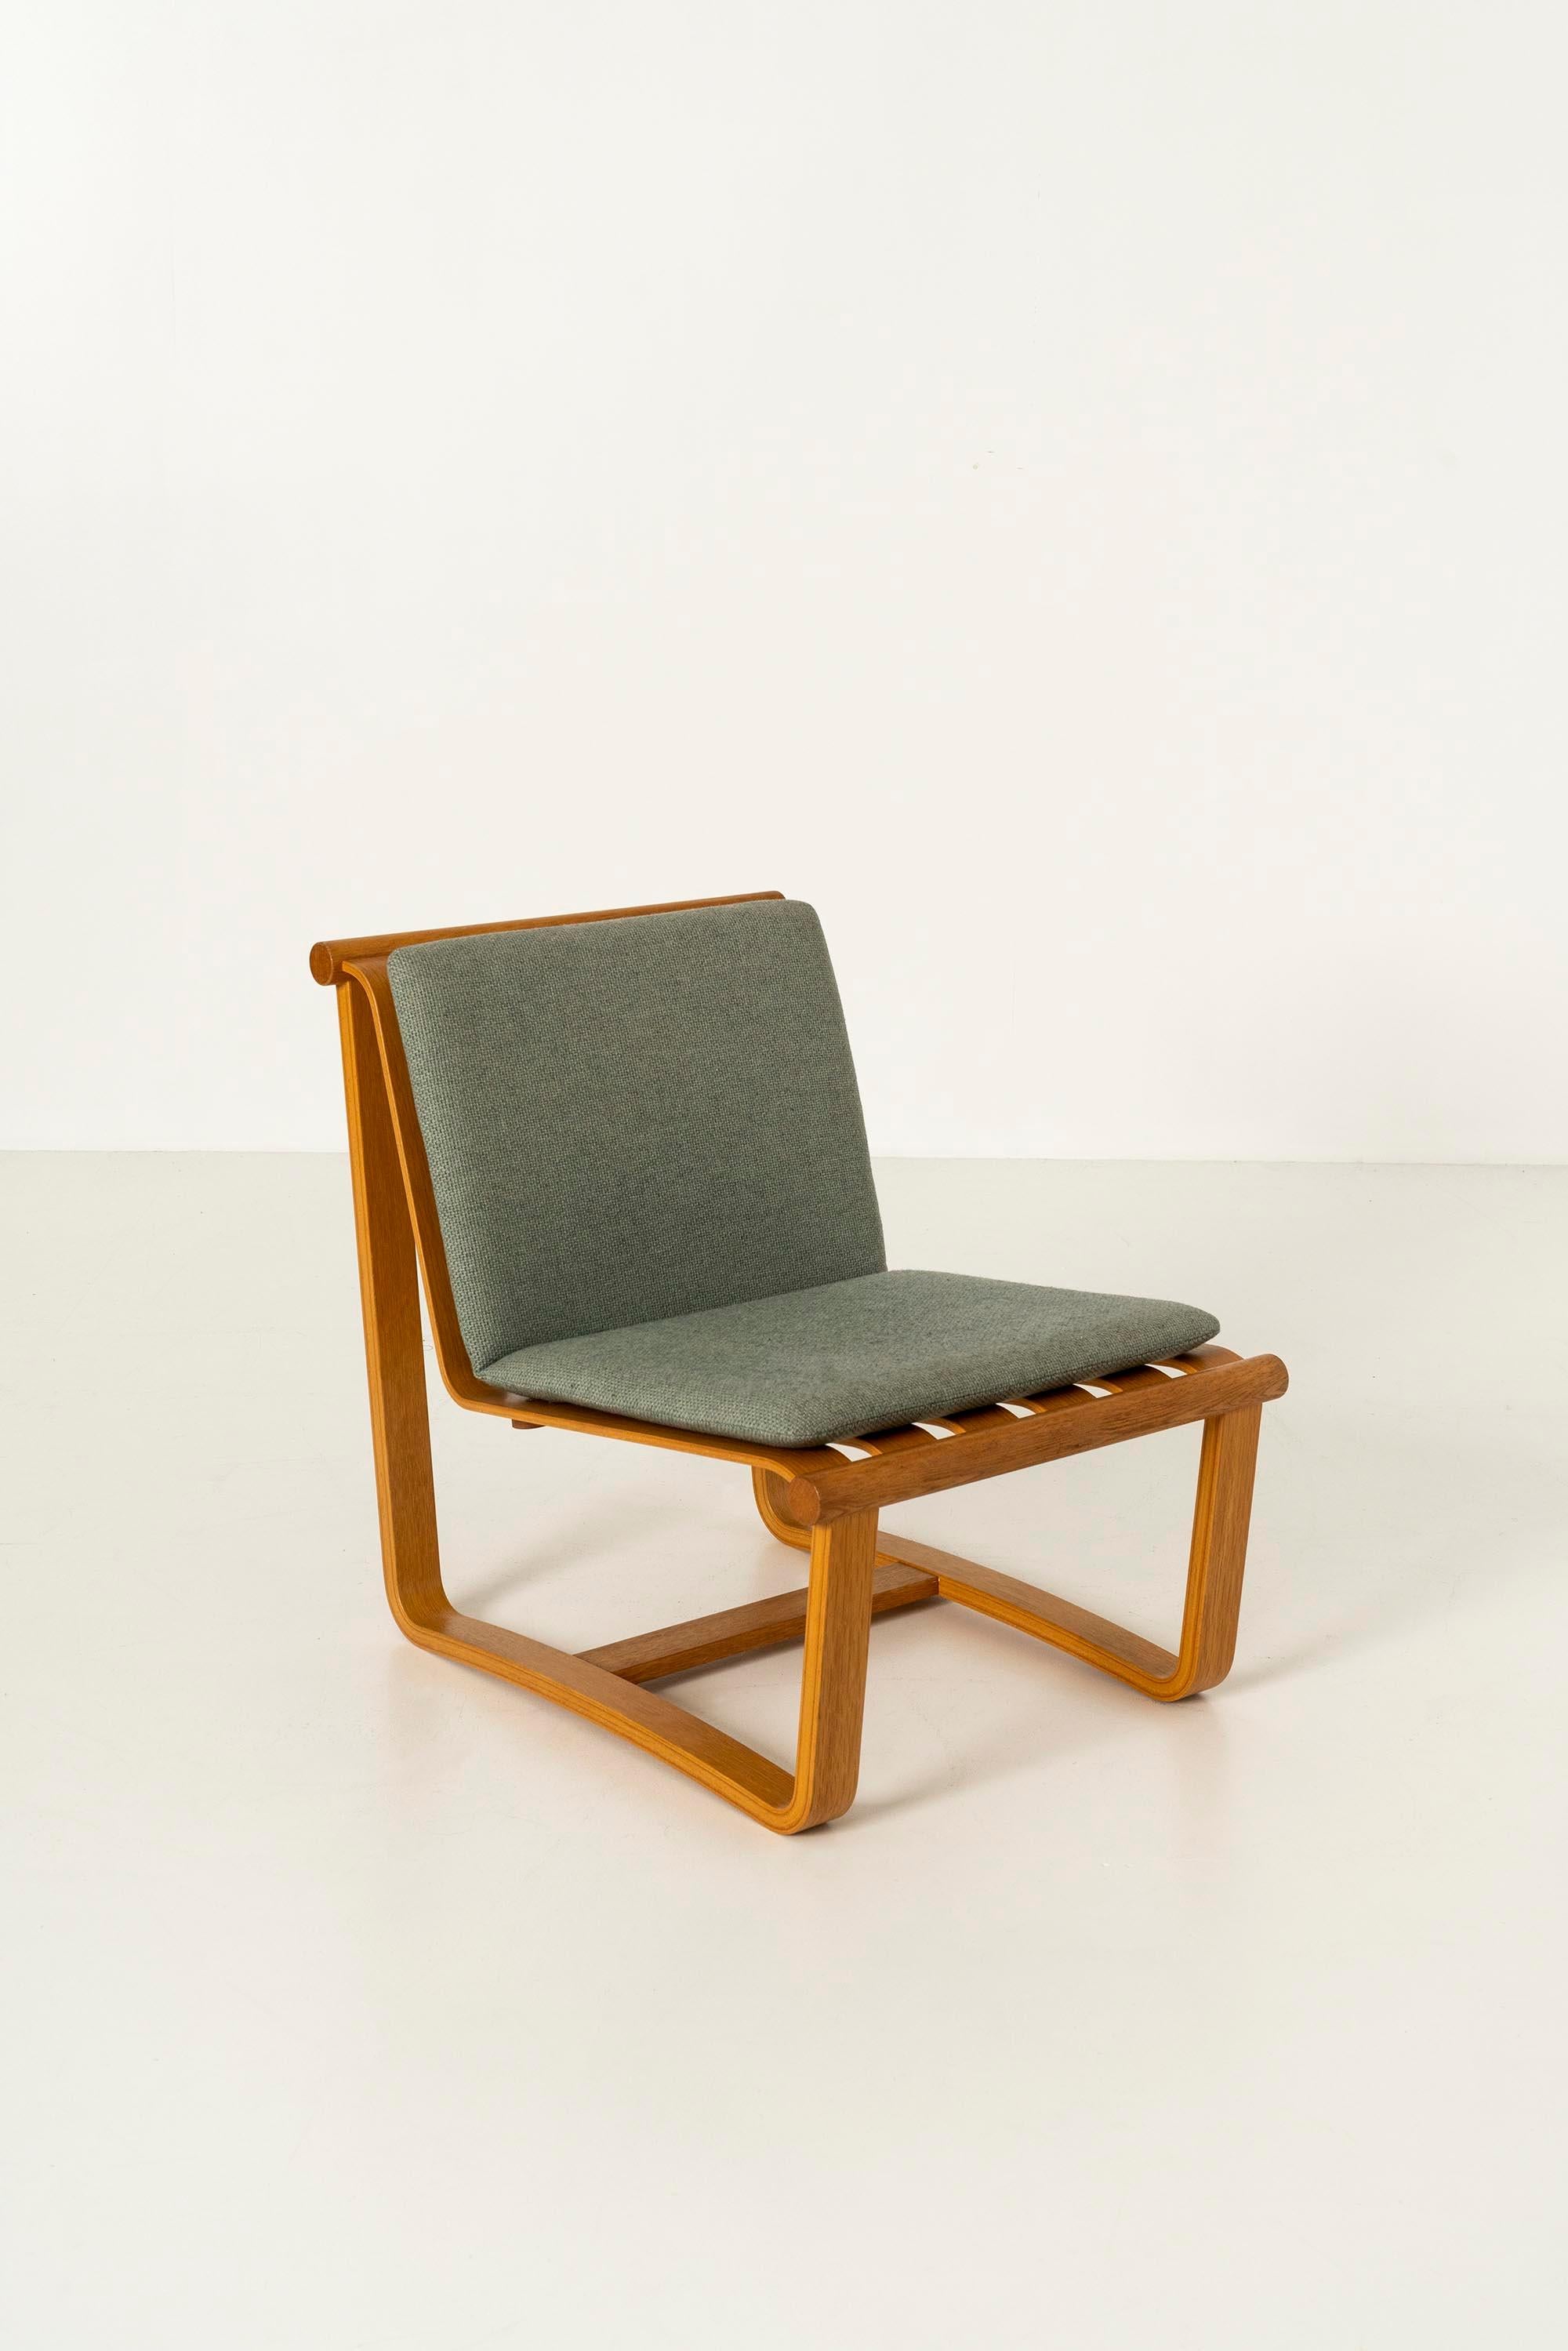 Easy chair model T-5510 in oak and fabric by Katsuo Matsumura. 

Katsuo Matsumura, one of Japan's top furniture designers, created the T-5510 easy chair in 1968 for Tendo Mokko. This piece shows his speciality in designing chairs that fit the